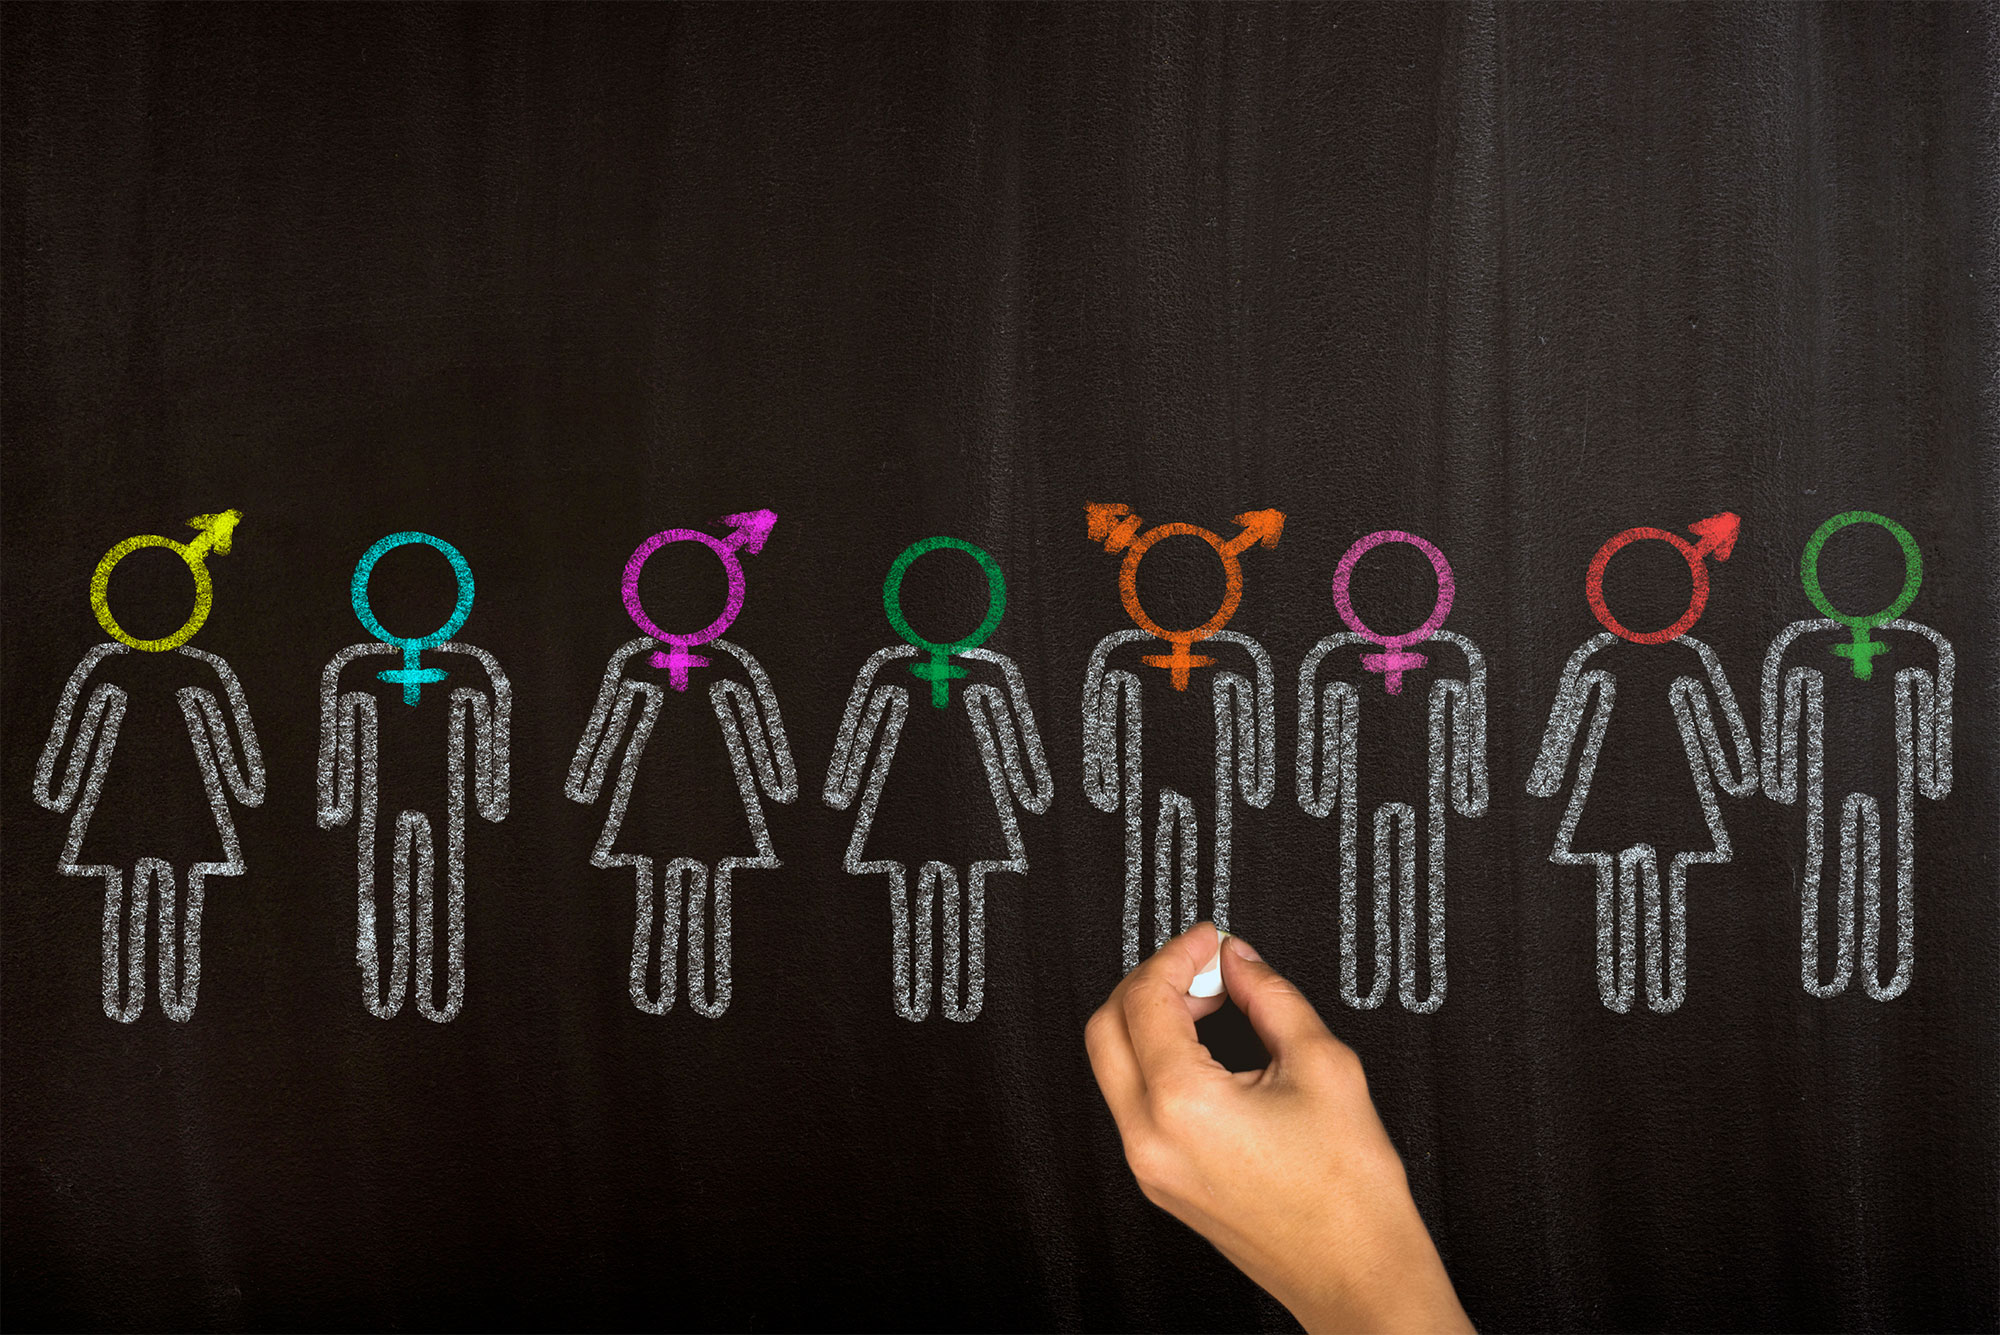 chalkboard illustration of figures with different gender identities